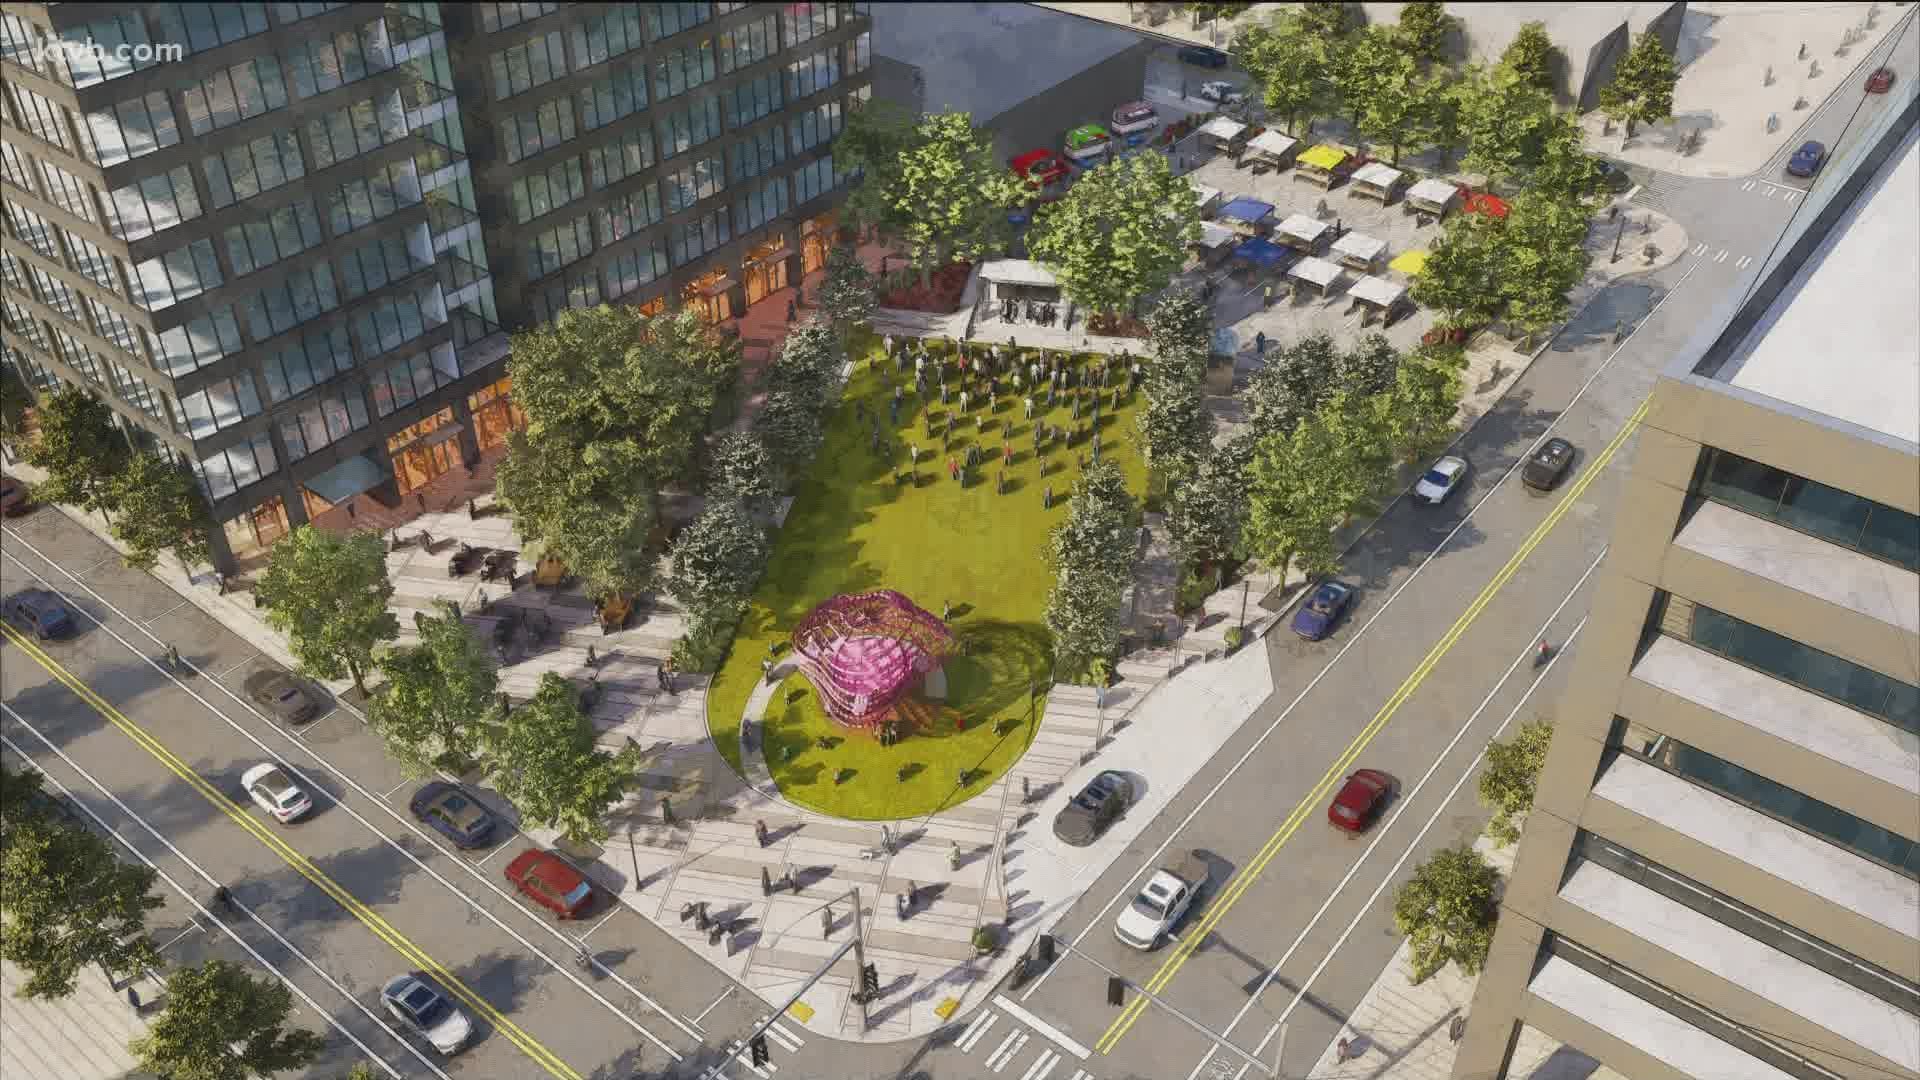 A big project is being built at 11th and Bannock streets. This one includes a new park for people to gather.